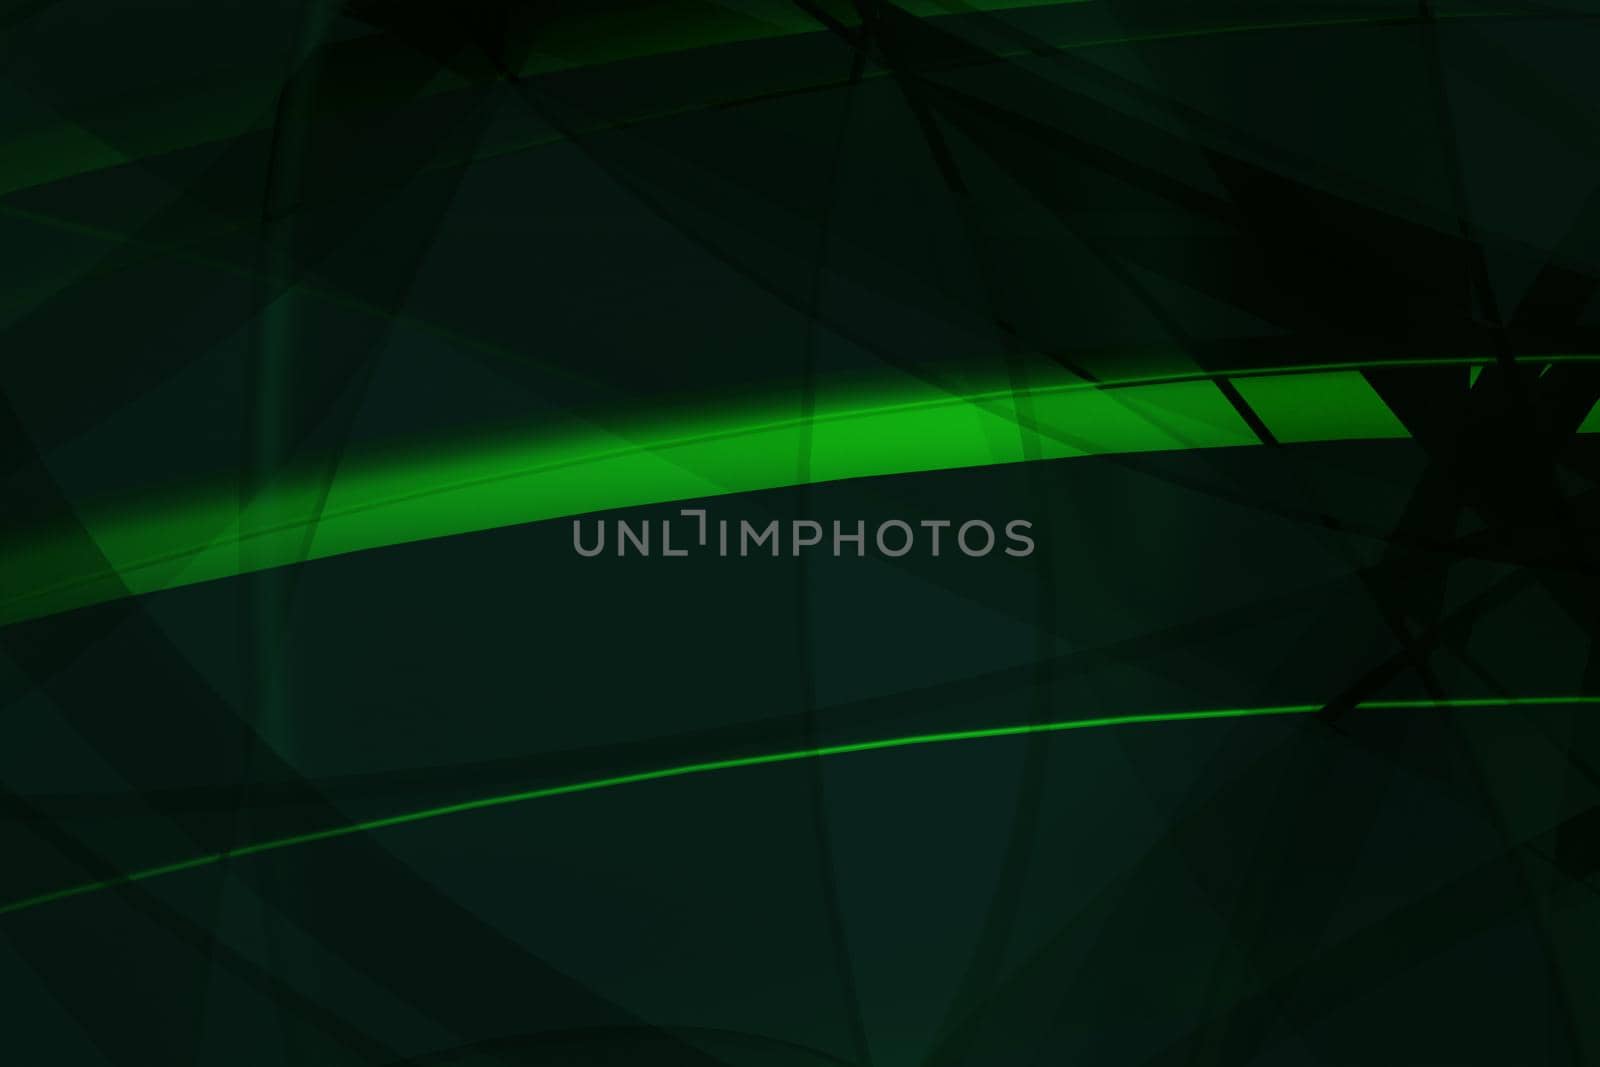 Abstract green 3d illustration - geometric background with waves, spirals and transparency effects